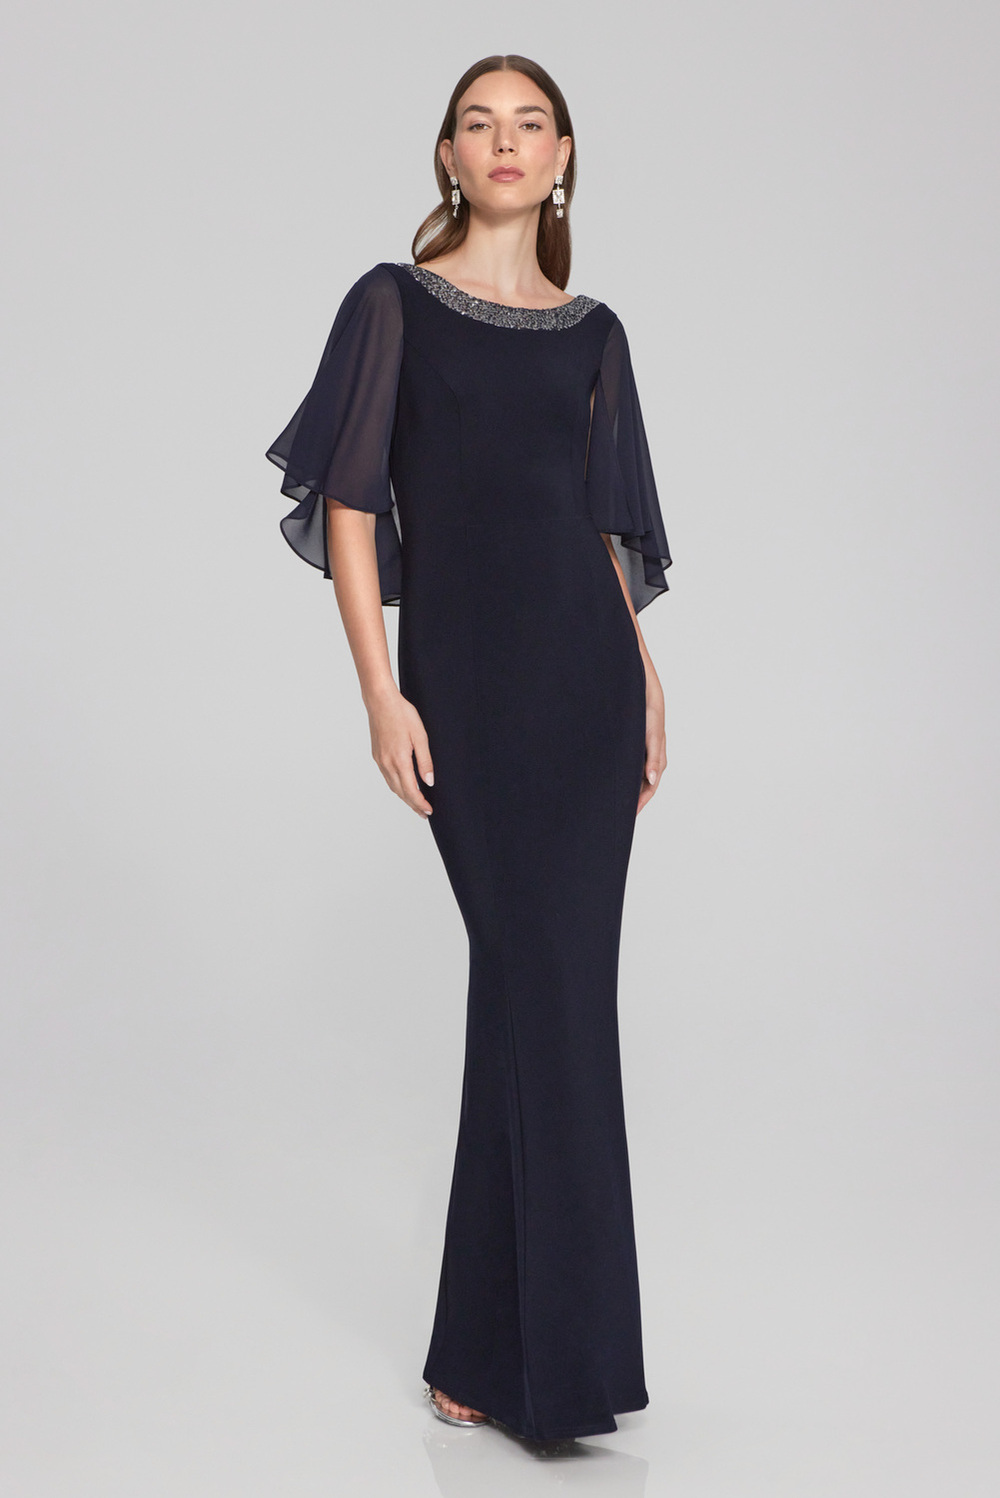 Rounded Neckline Sheer Sleeve Dress Style 241717. Midnight Blue